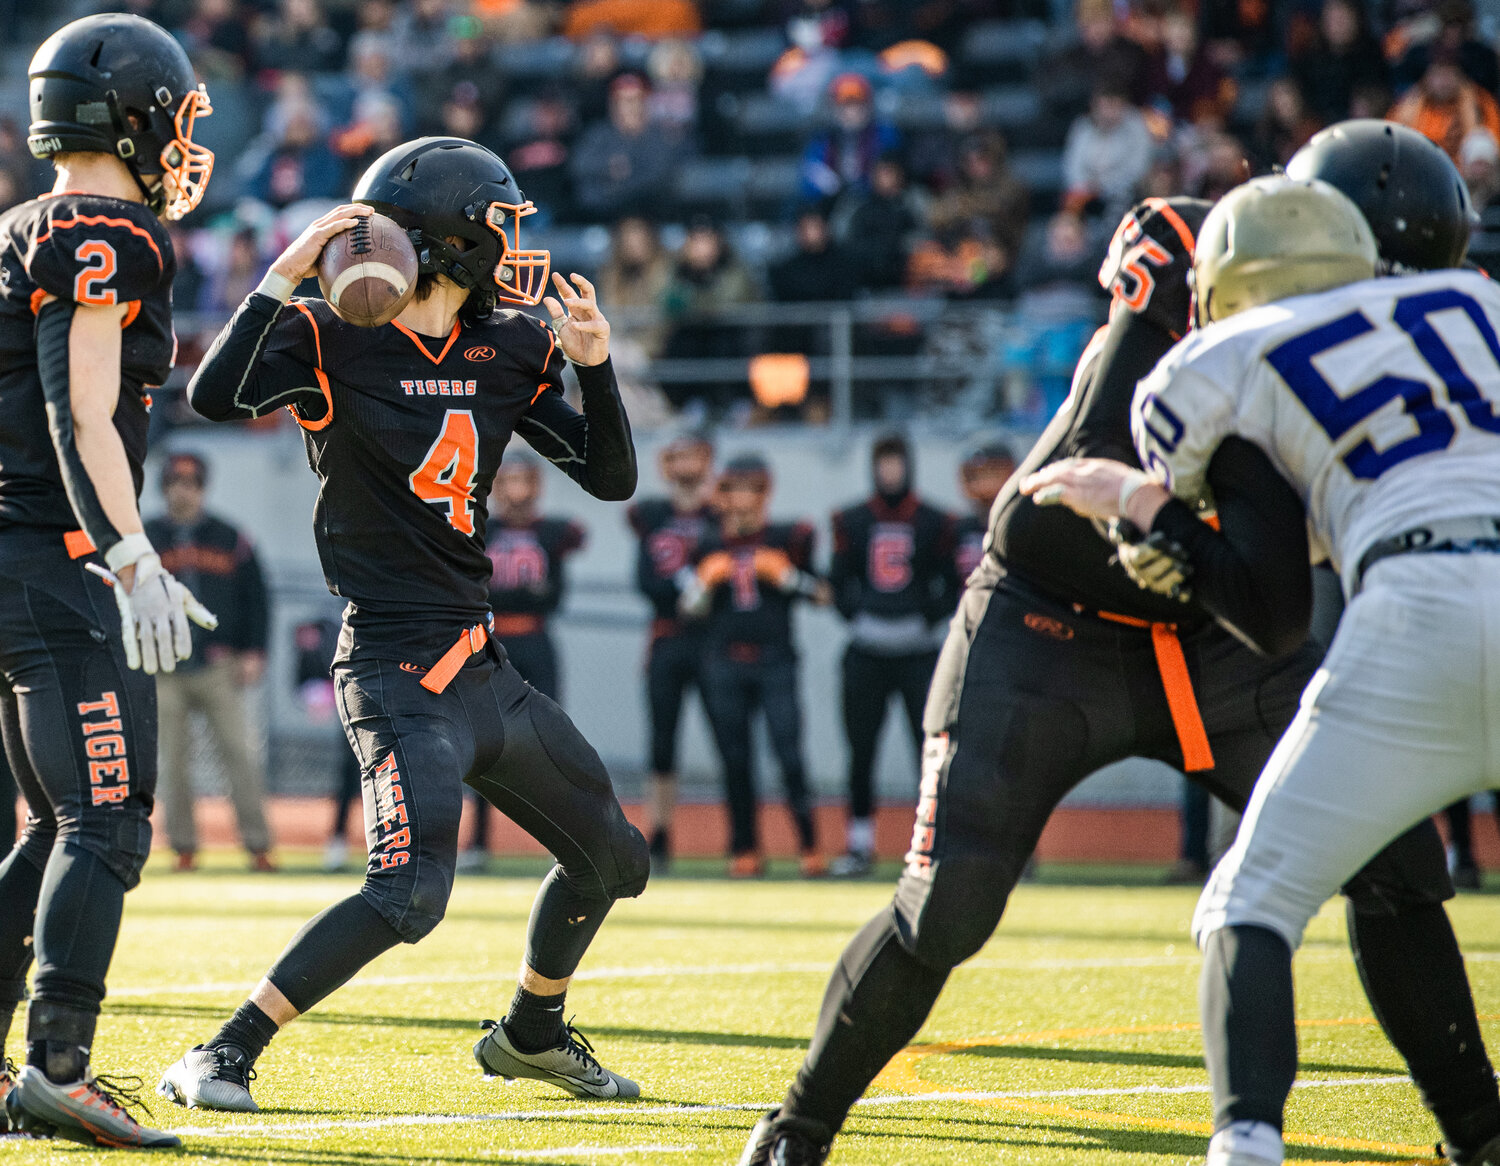 Napavine quarterback Ashton Demarest looks to throw the football during a 2B state semifinal matchup against Onalaska on Saturday in Tumwater.